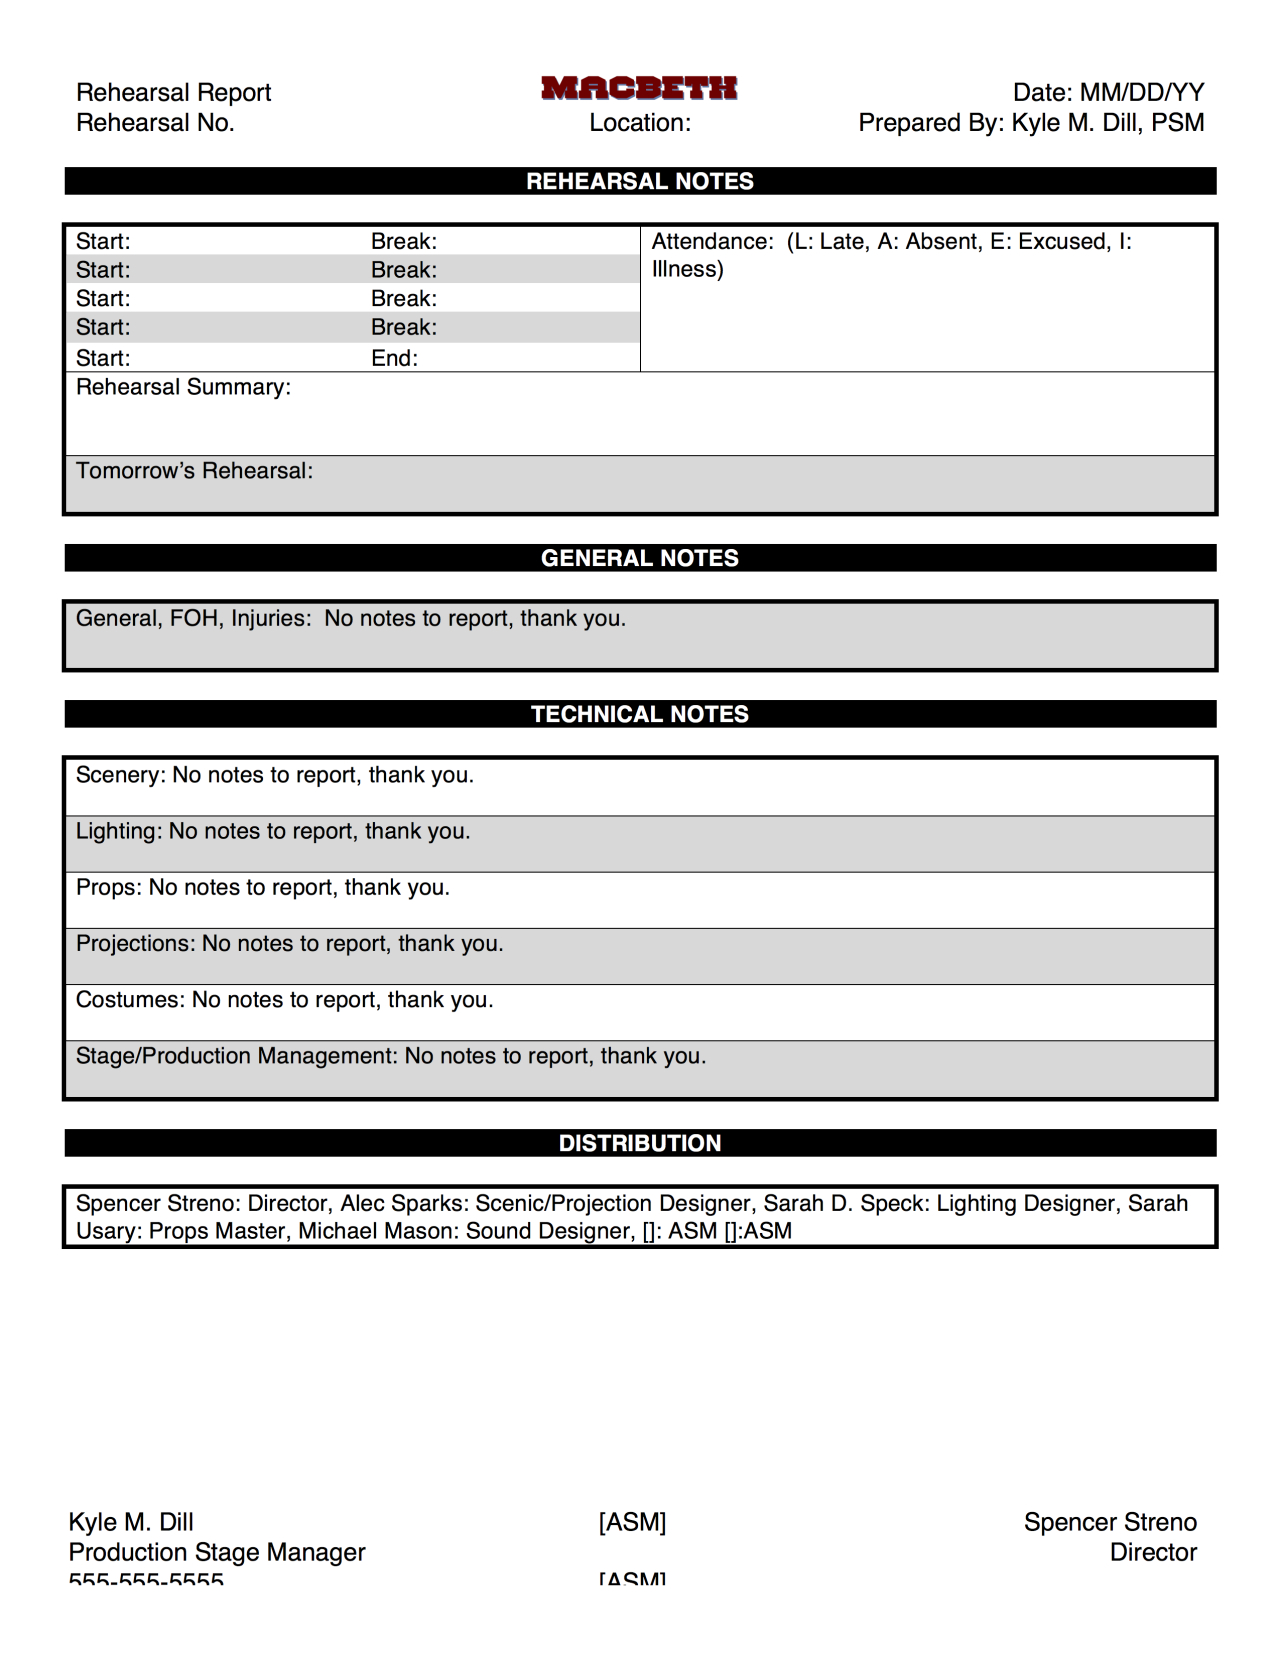 Macbeth@su Production Blog — Here's The Template For Our Throughout Rehearsal Report Template